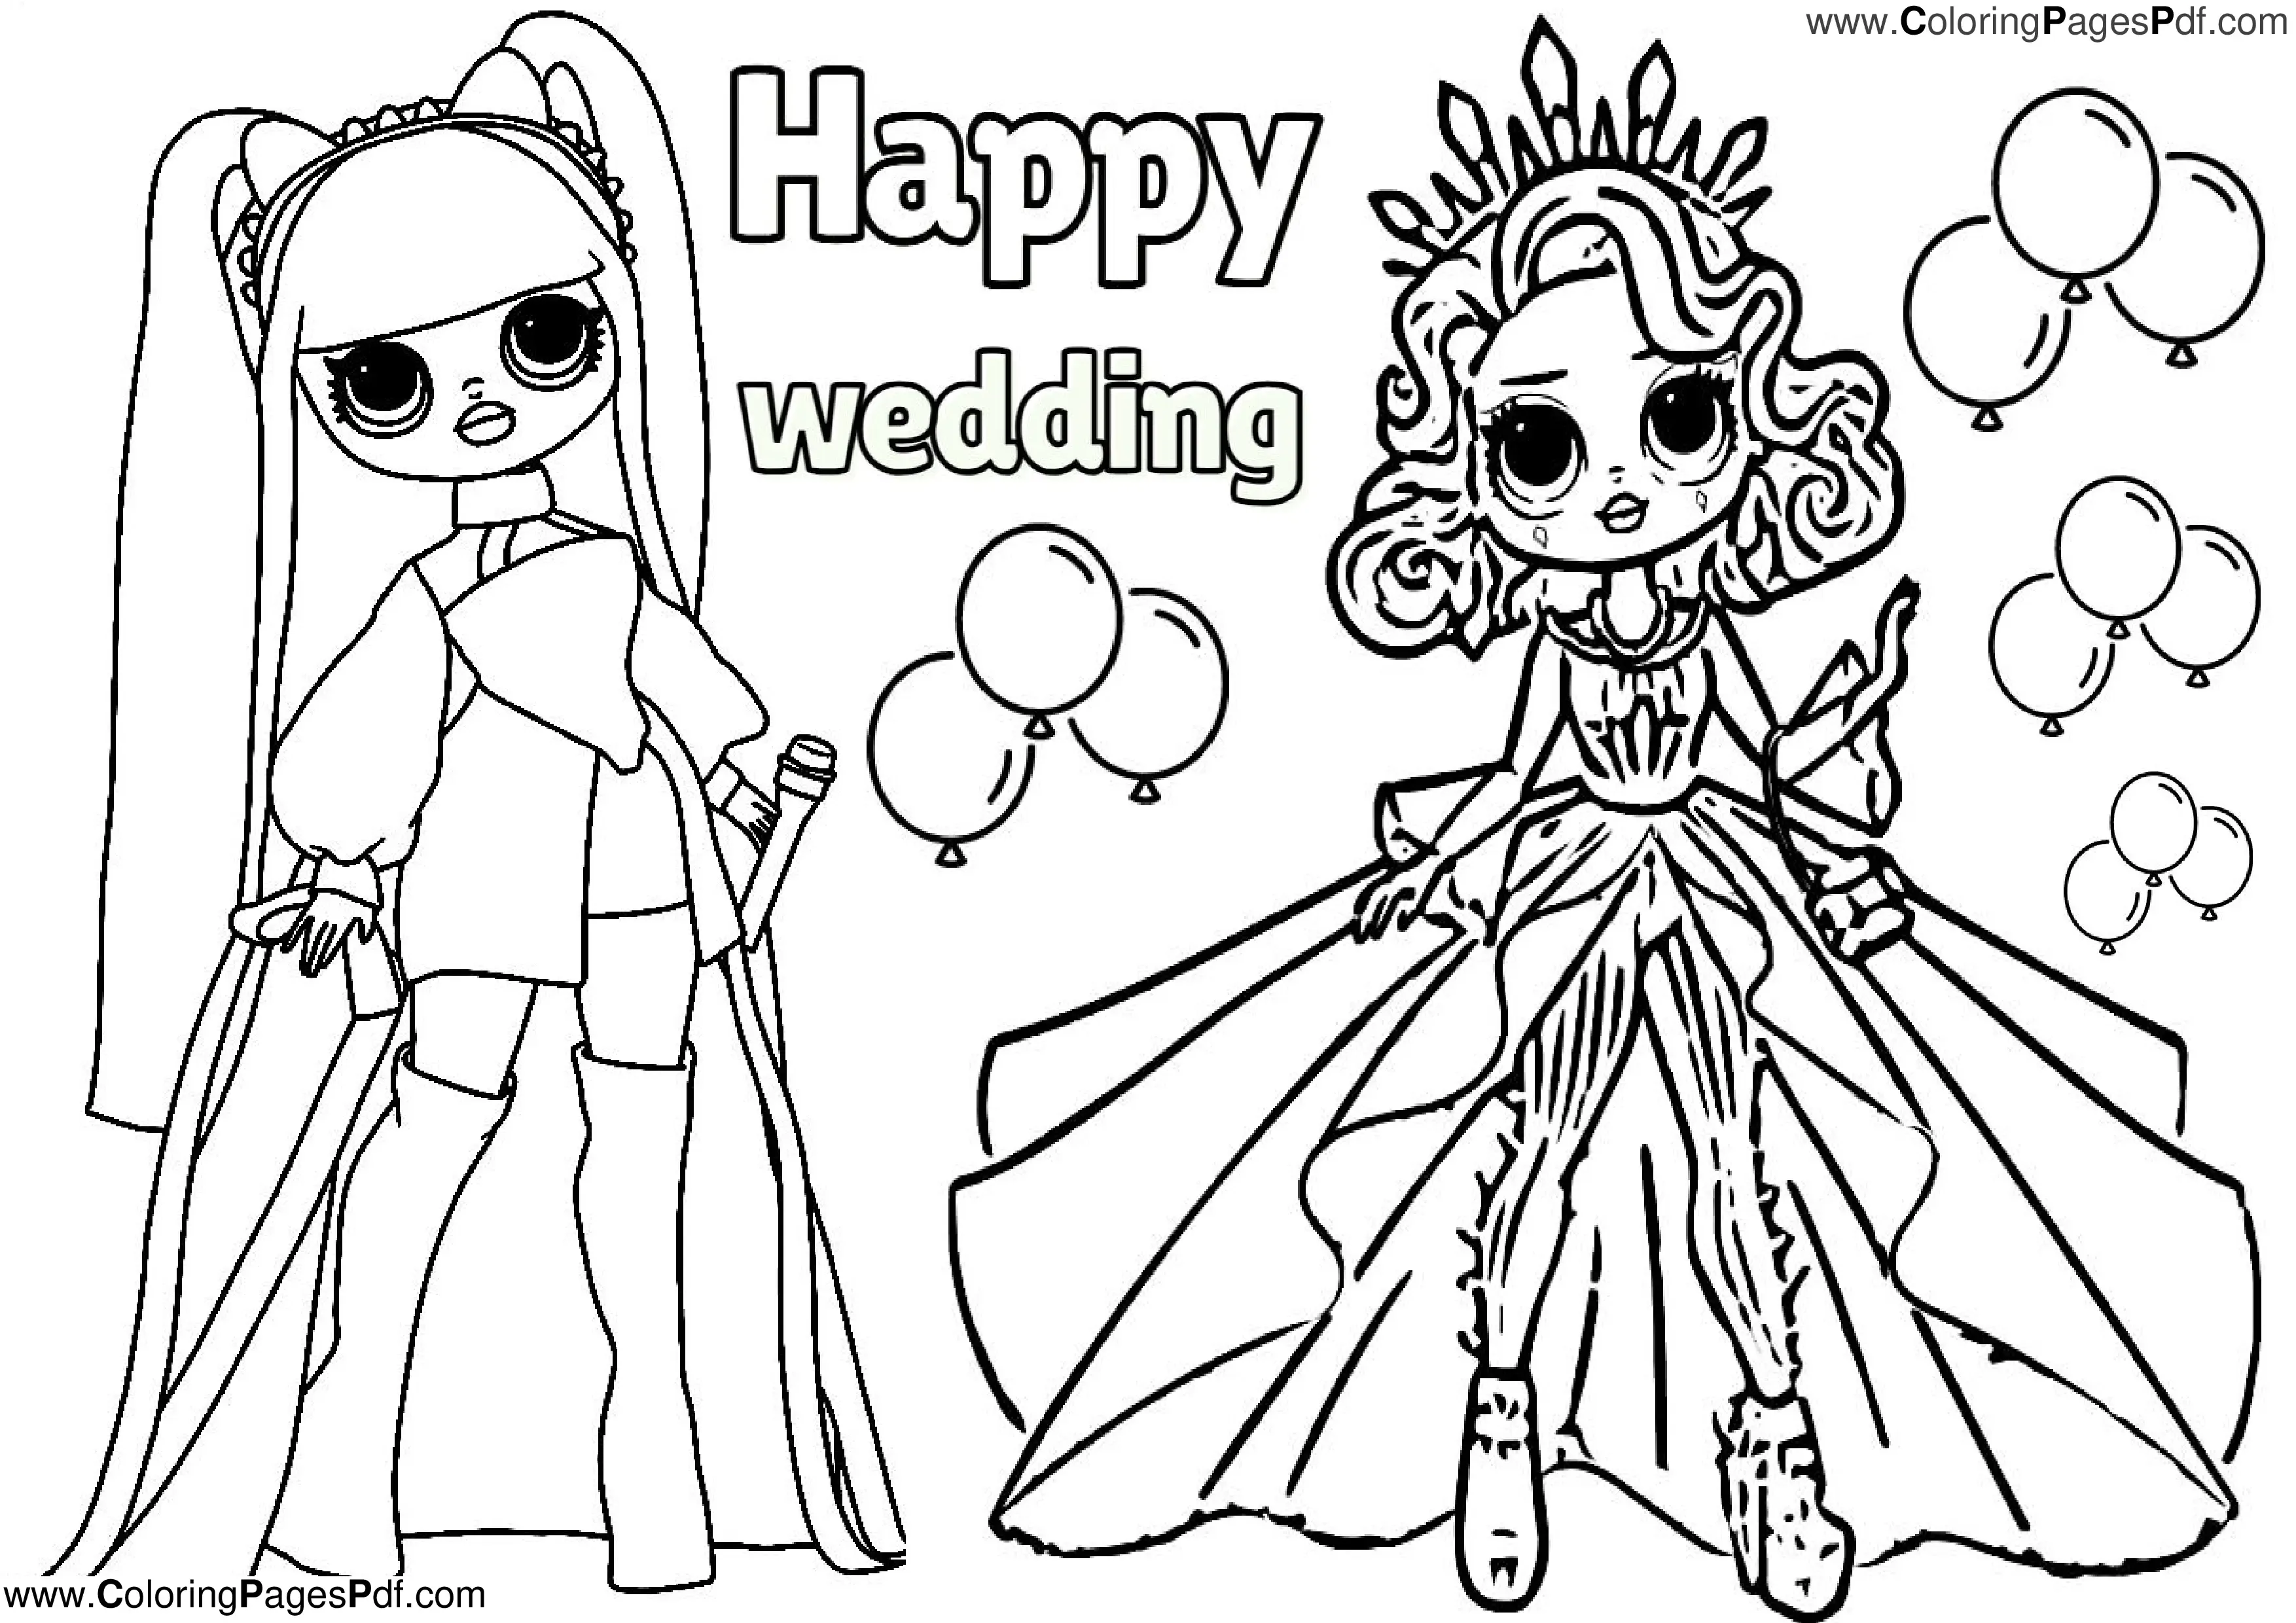 Lol omg wonder day coloring pages